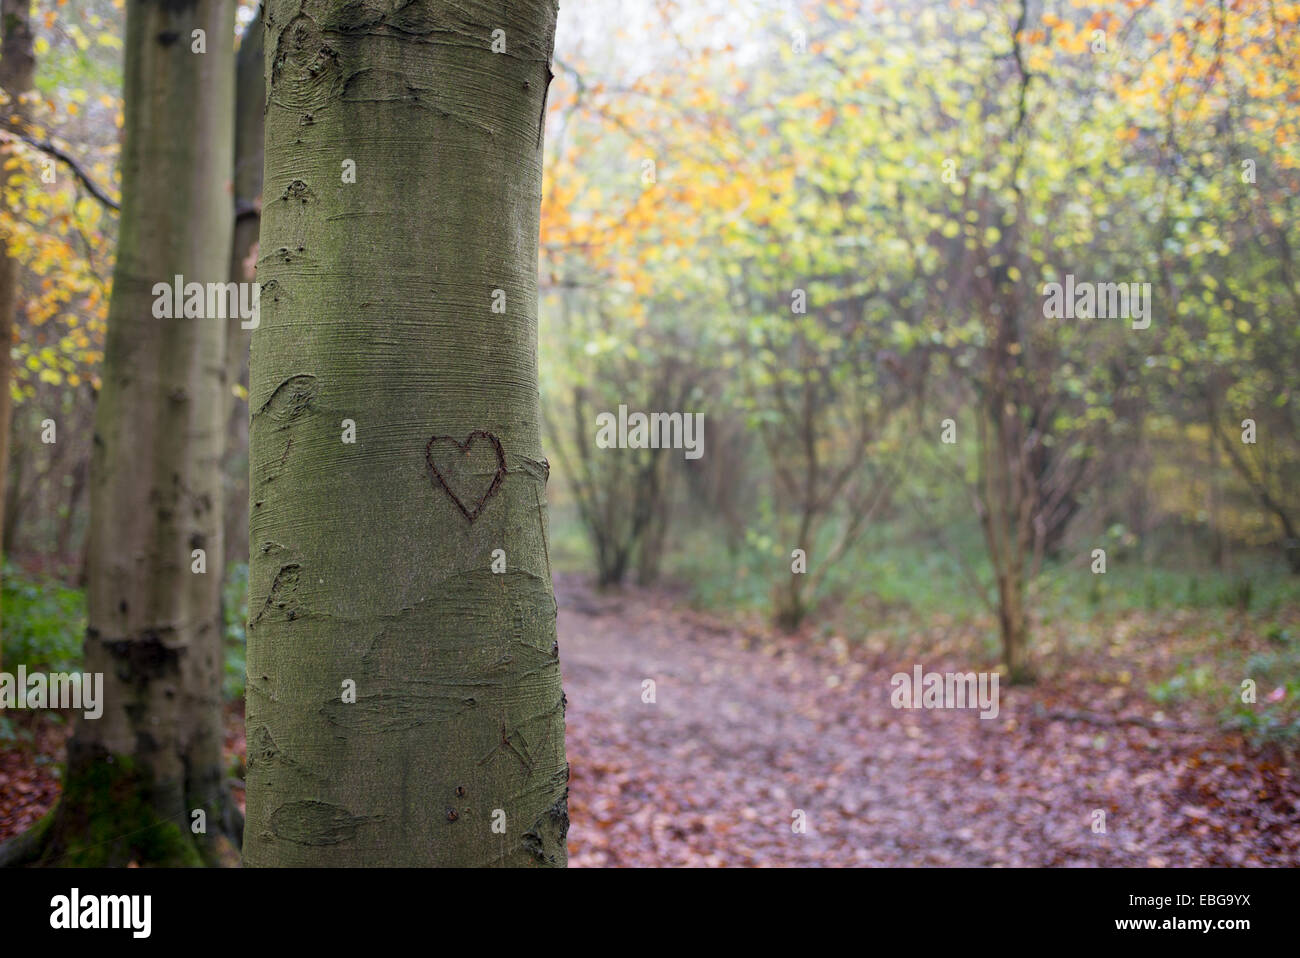 Love heart carved into tree trunk in an English woodland in autumn. Stock Photo